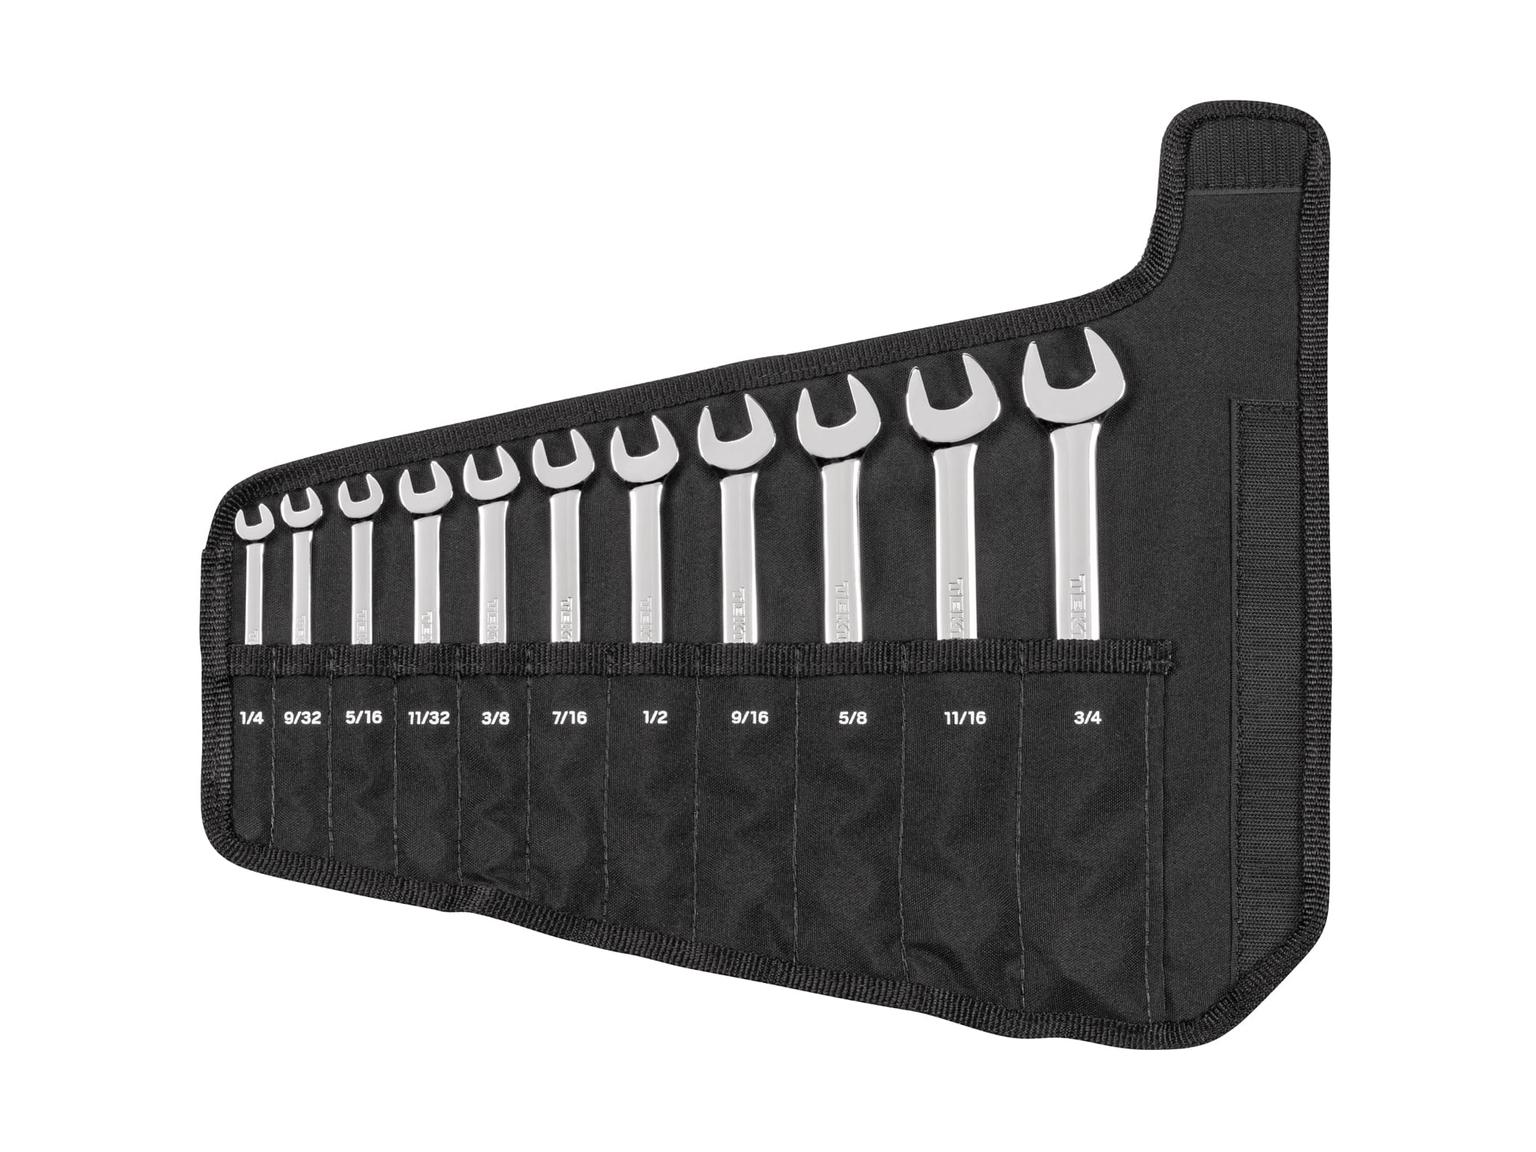 TEKTON WCB94101-T Combination Wrench Set with Pouch, 11-Piece (1/4 - 3/4 in.)